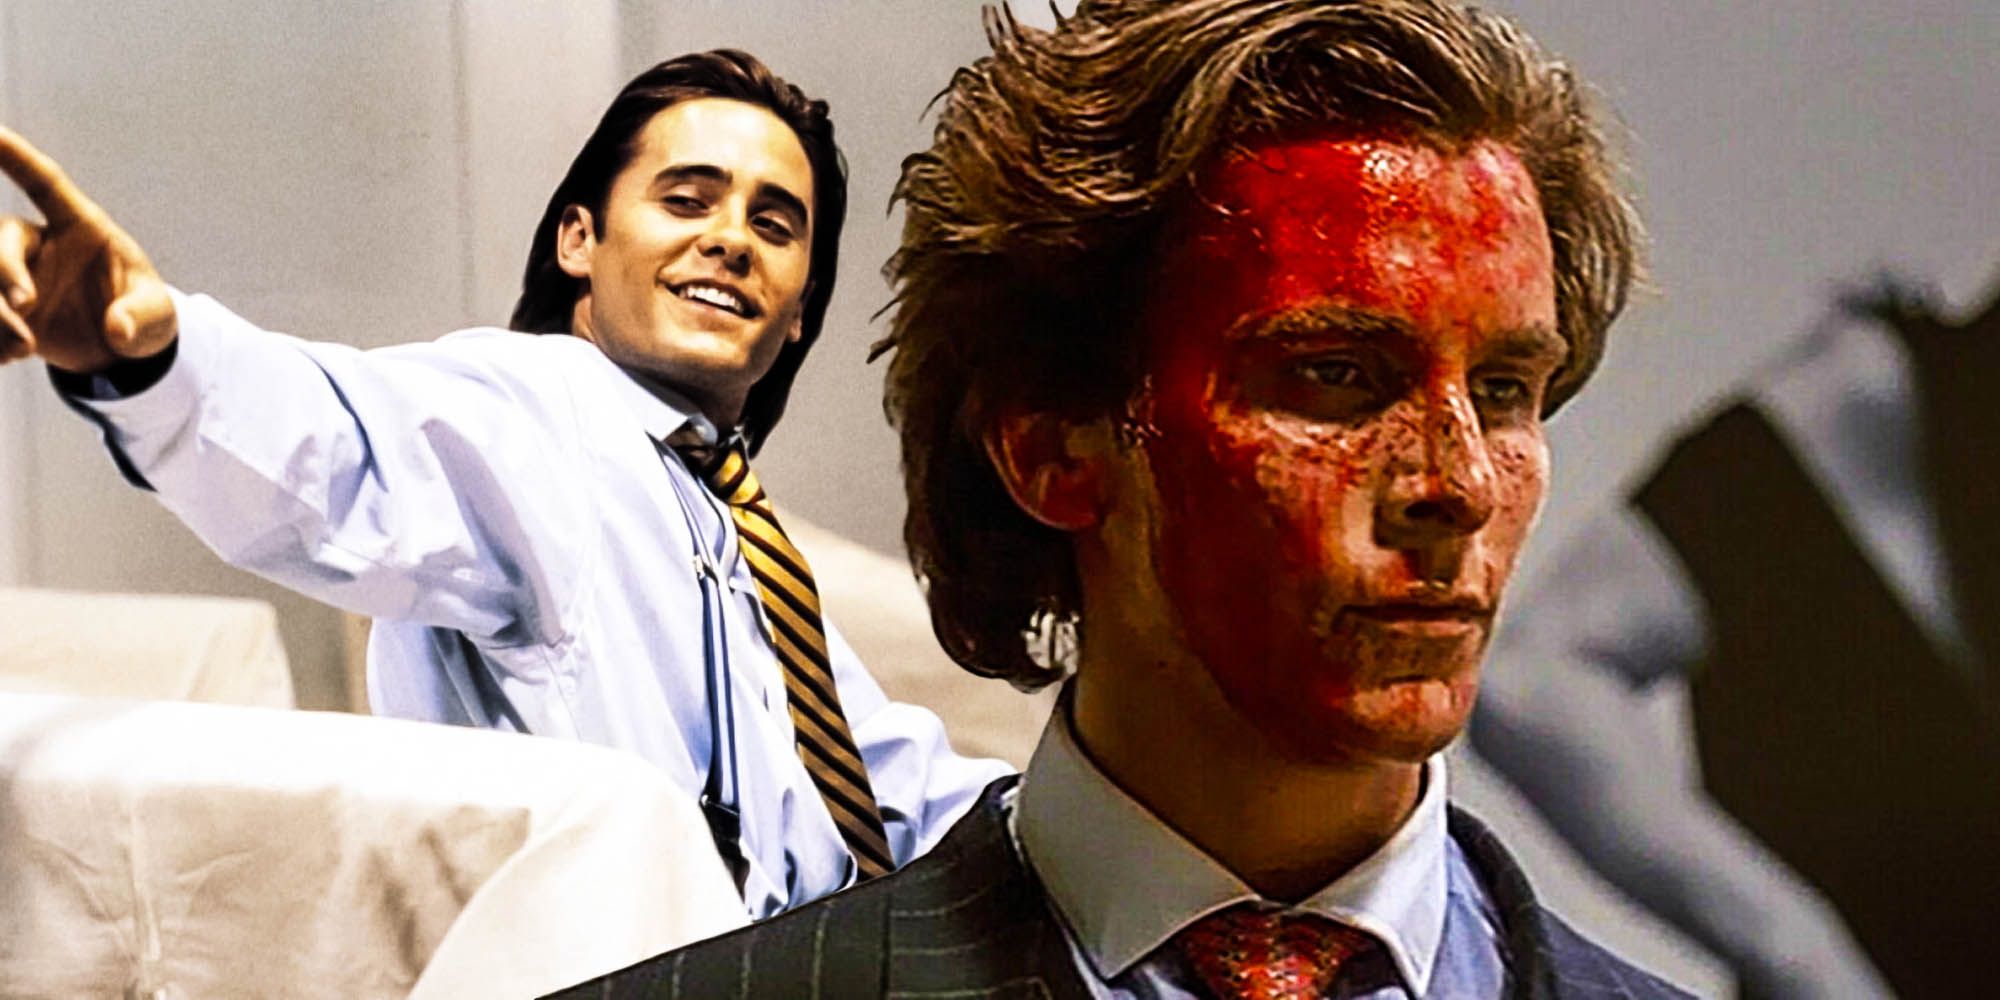 American Psycho: Why The Apartment Was Clean (What Happened To The Bodies?)